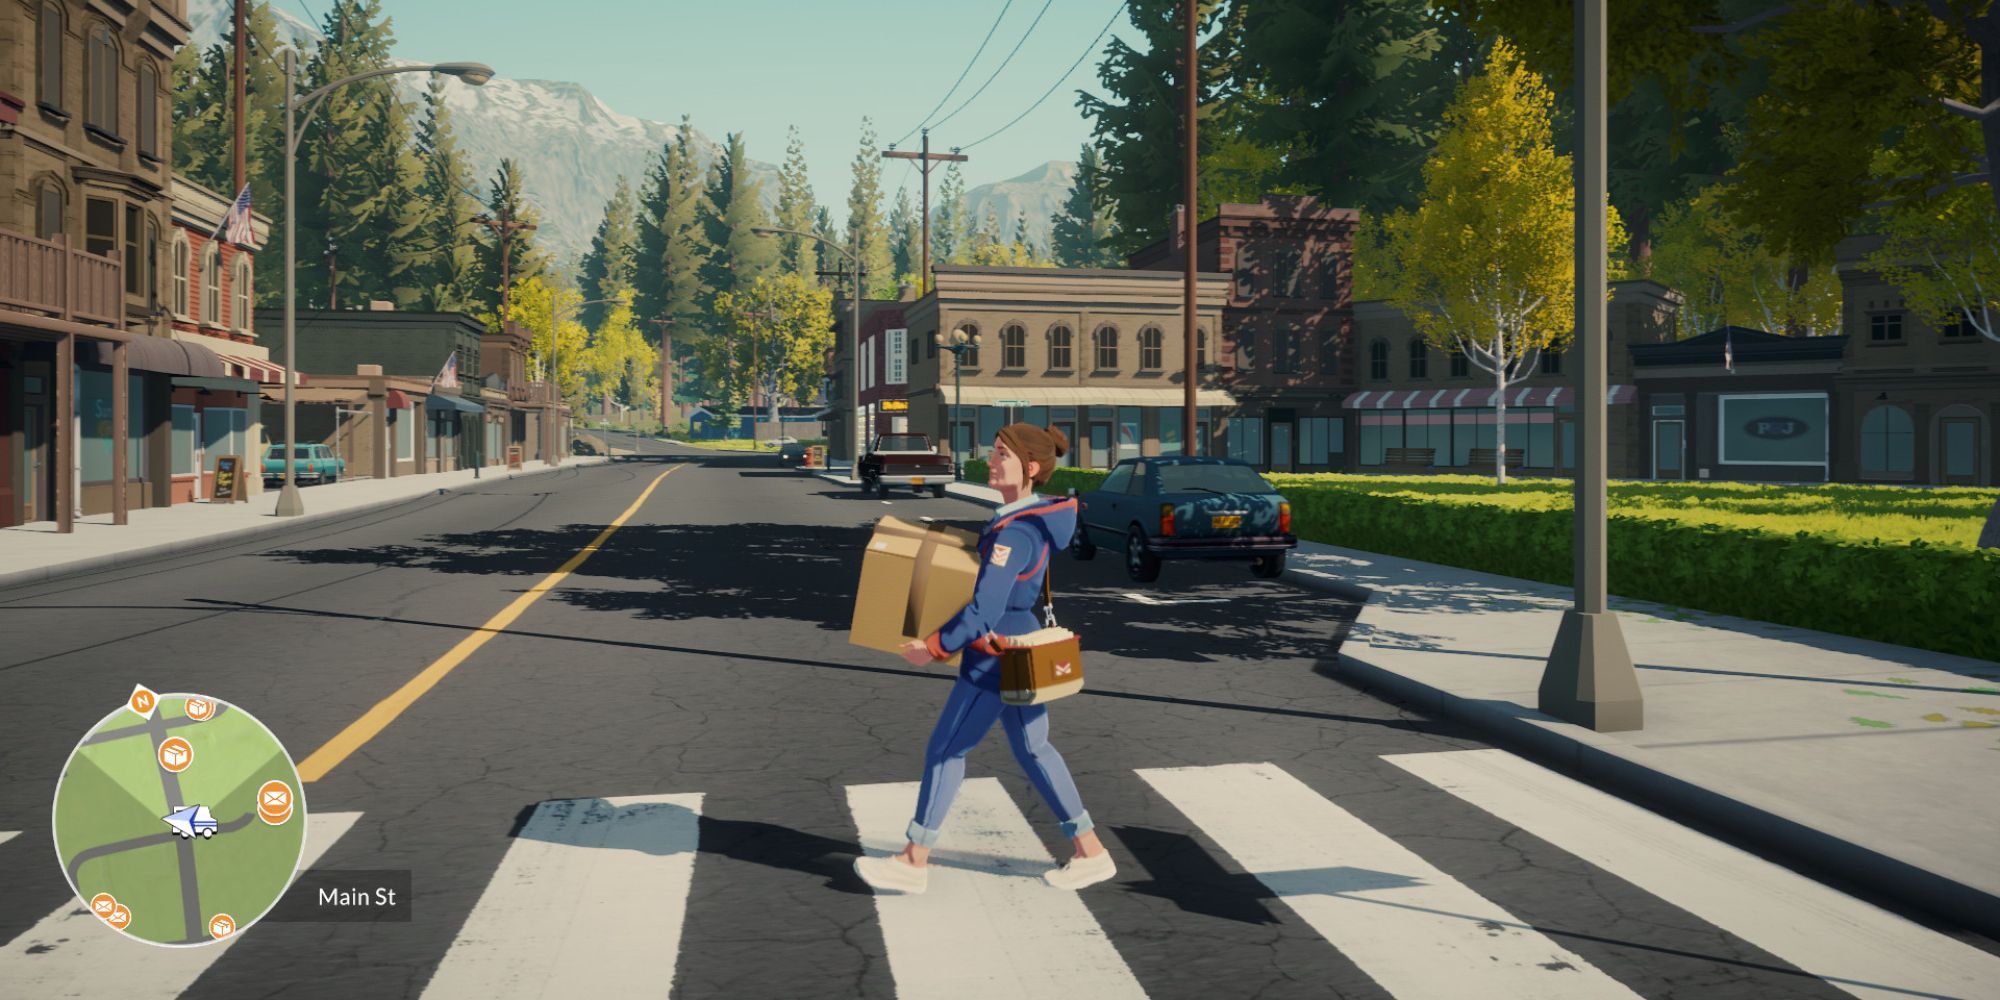 a wide shot of Meredith from Lake carrying a brown box across a road with various buildings, trees and cars in the background